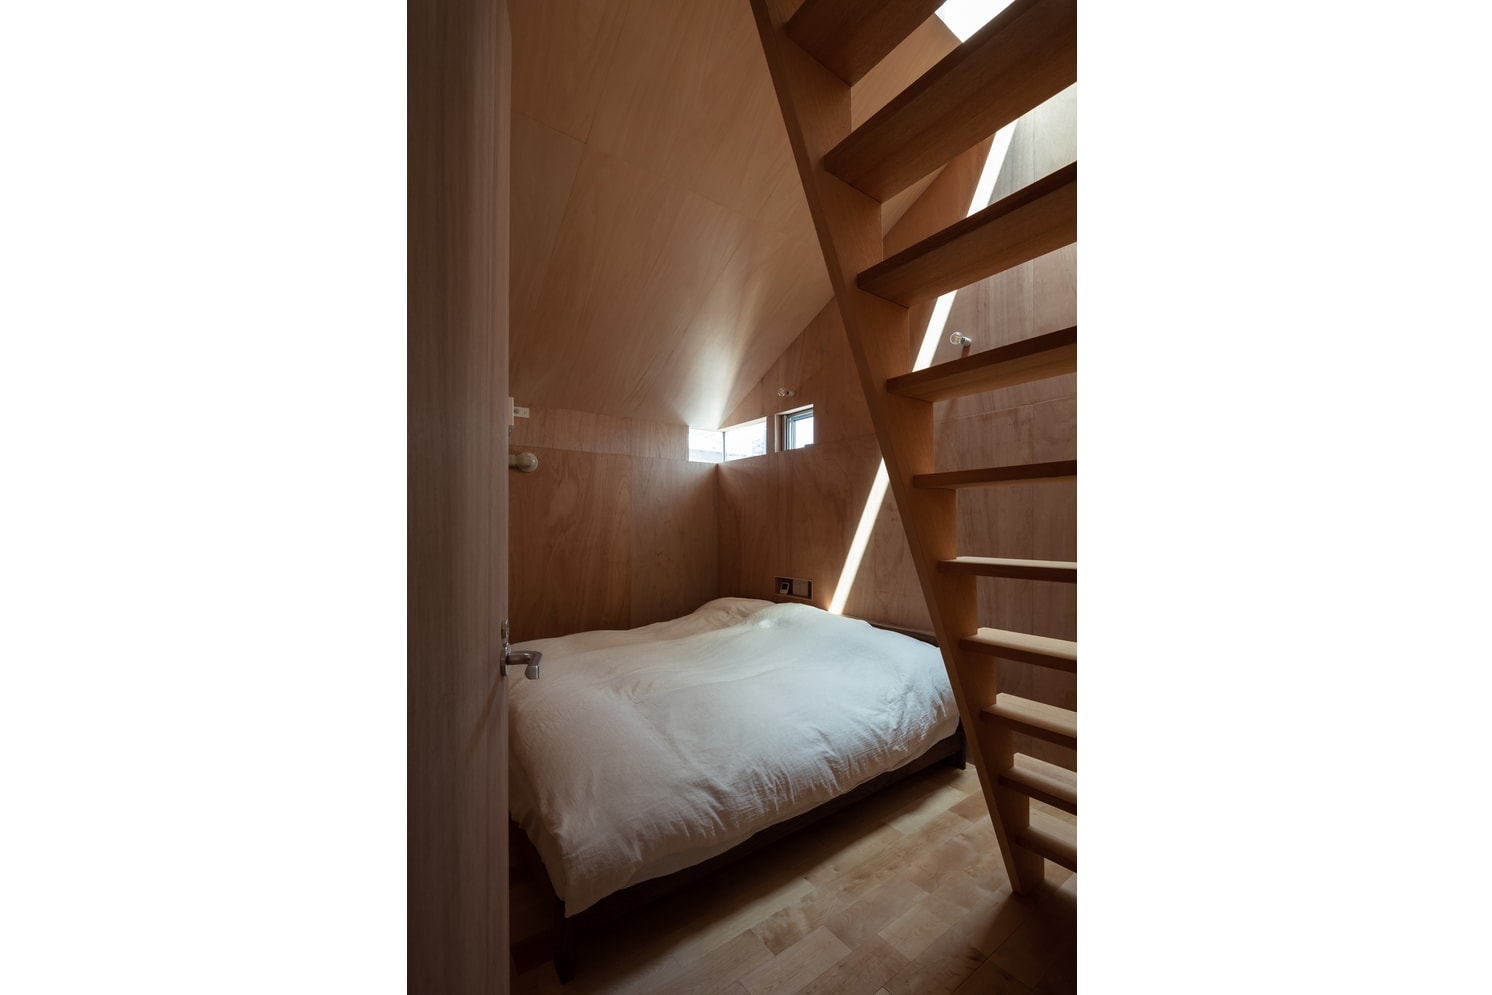 Horibe Associates Japanese Home house dwelling structure architecture shiba prefecture